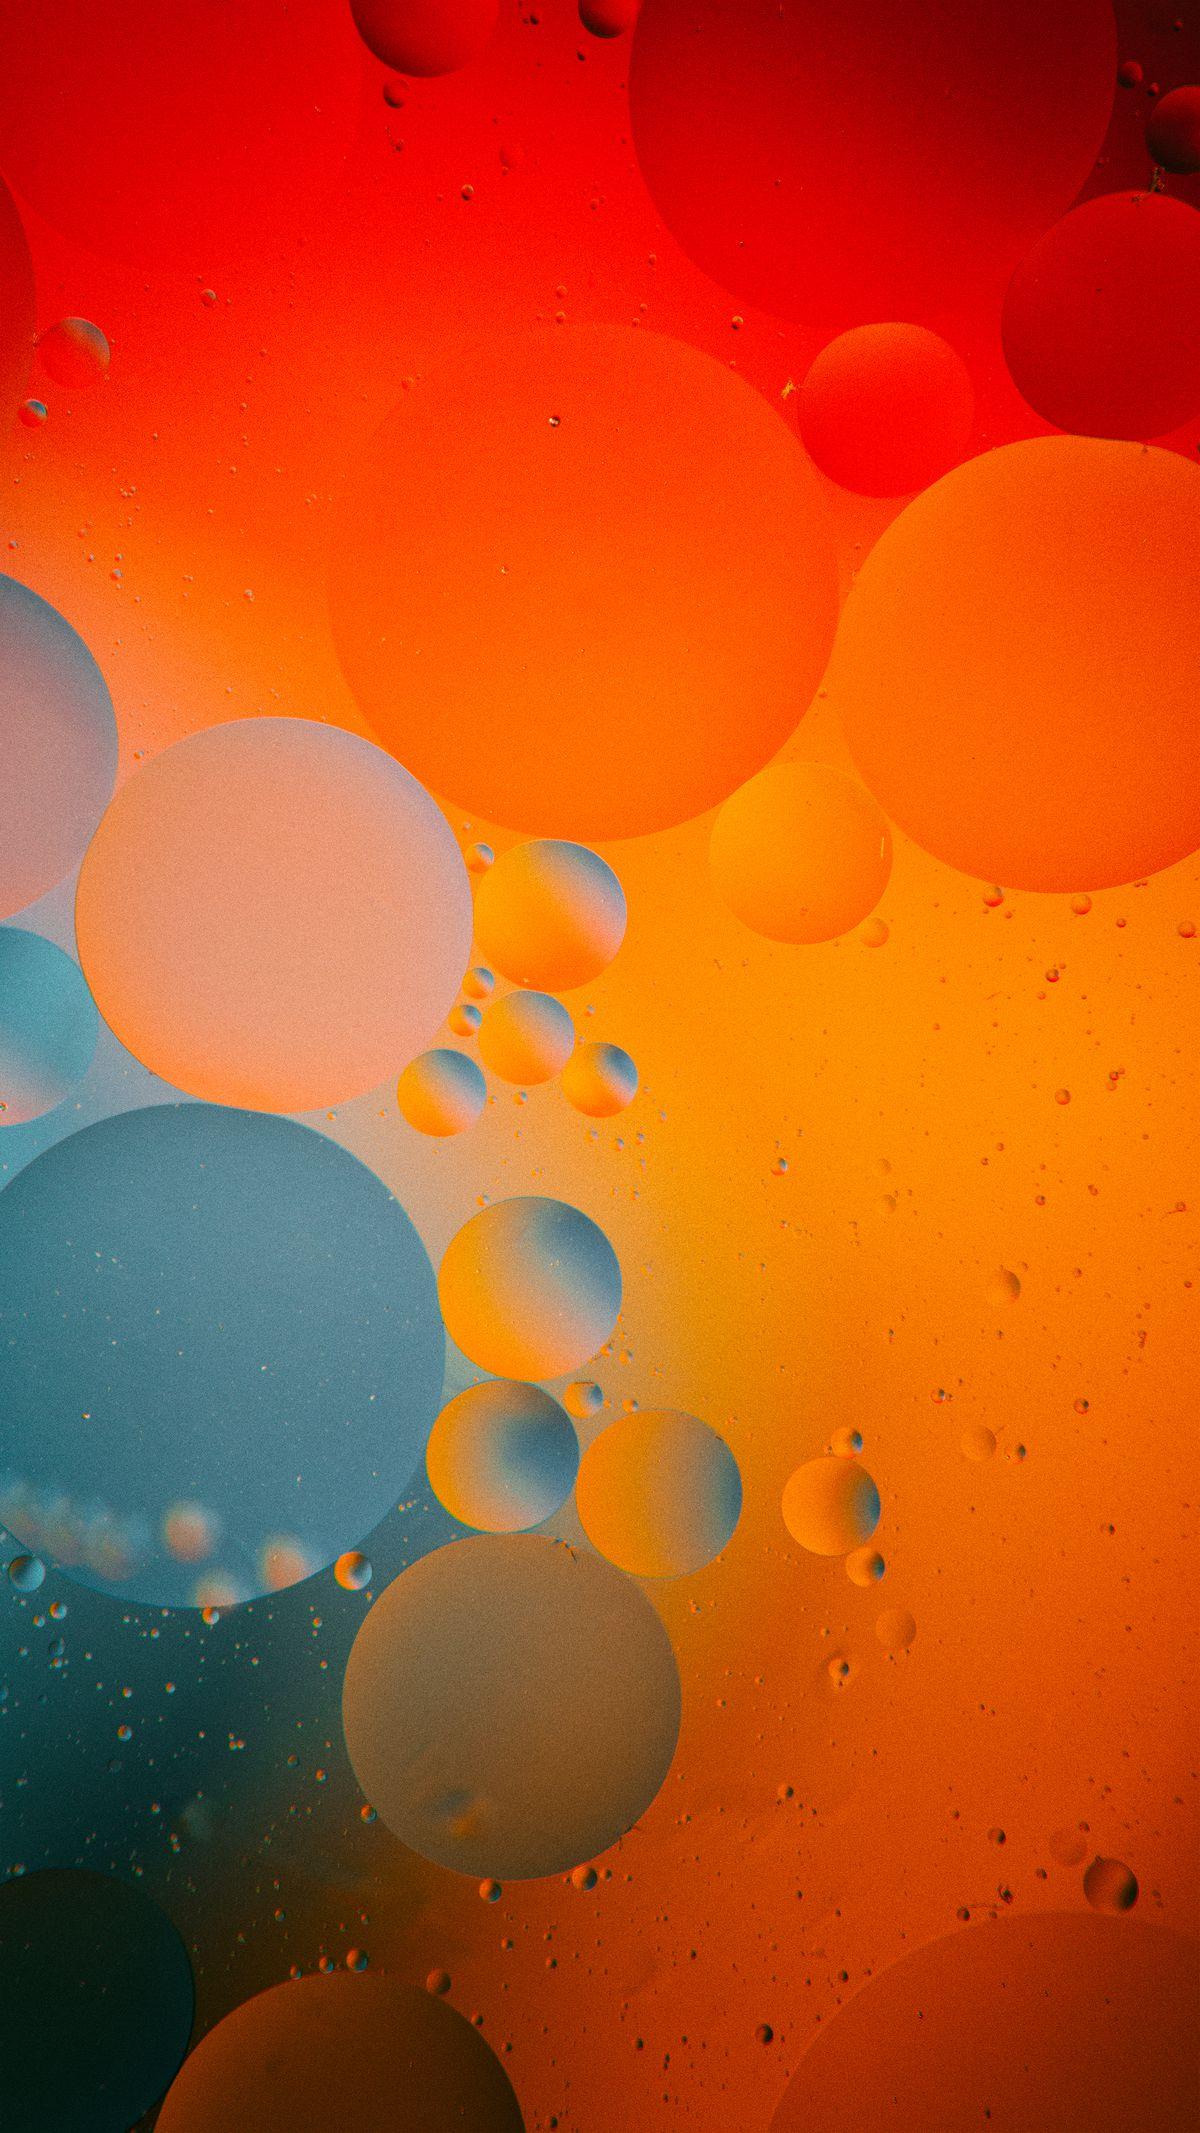 Wallpapers from The Verge